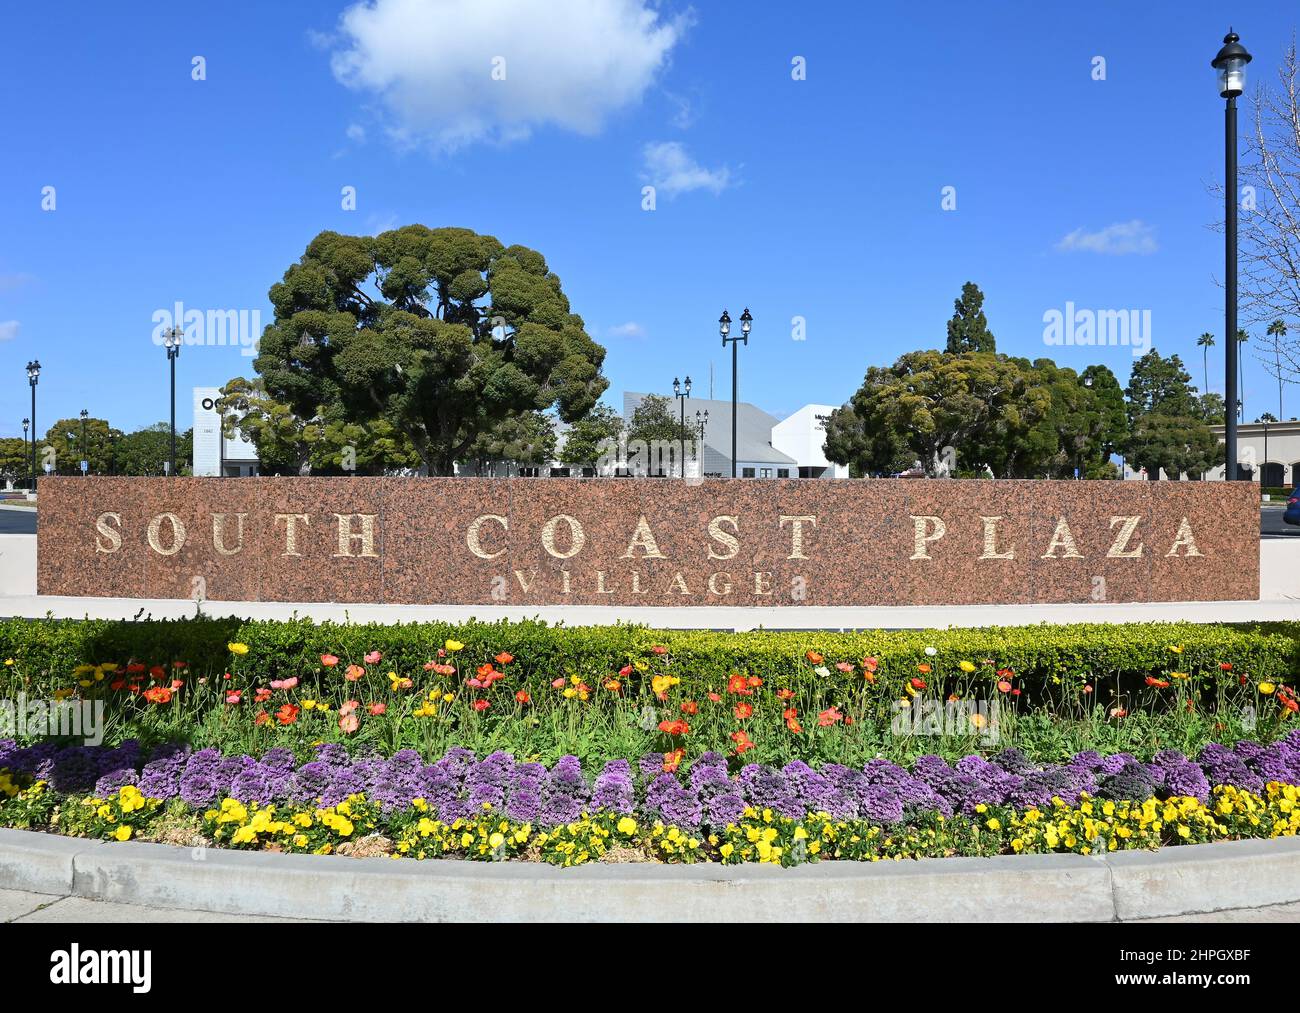 SANTA ANA, CALIFORNIA - 16 FEB 2022: Sign at the South Coast Plaza Village featuring boutiques, museums, art galleries, and restaurants Stock Photo